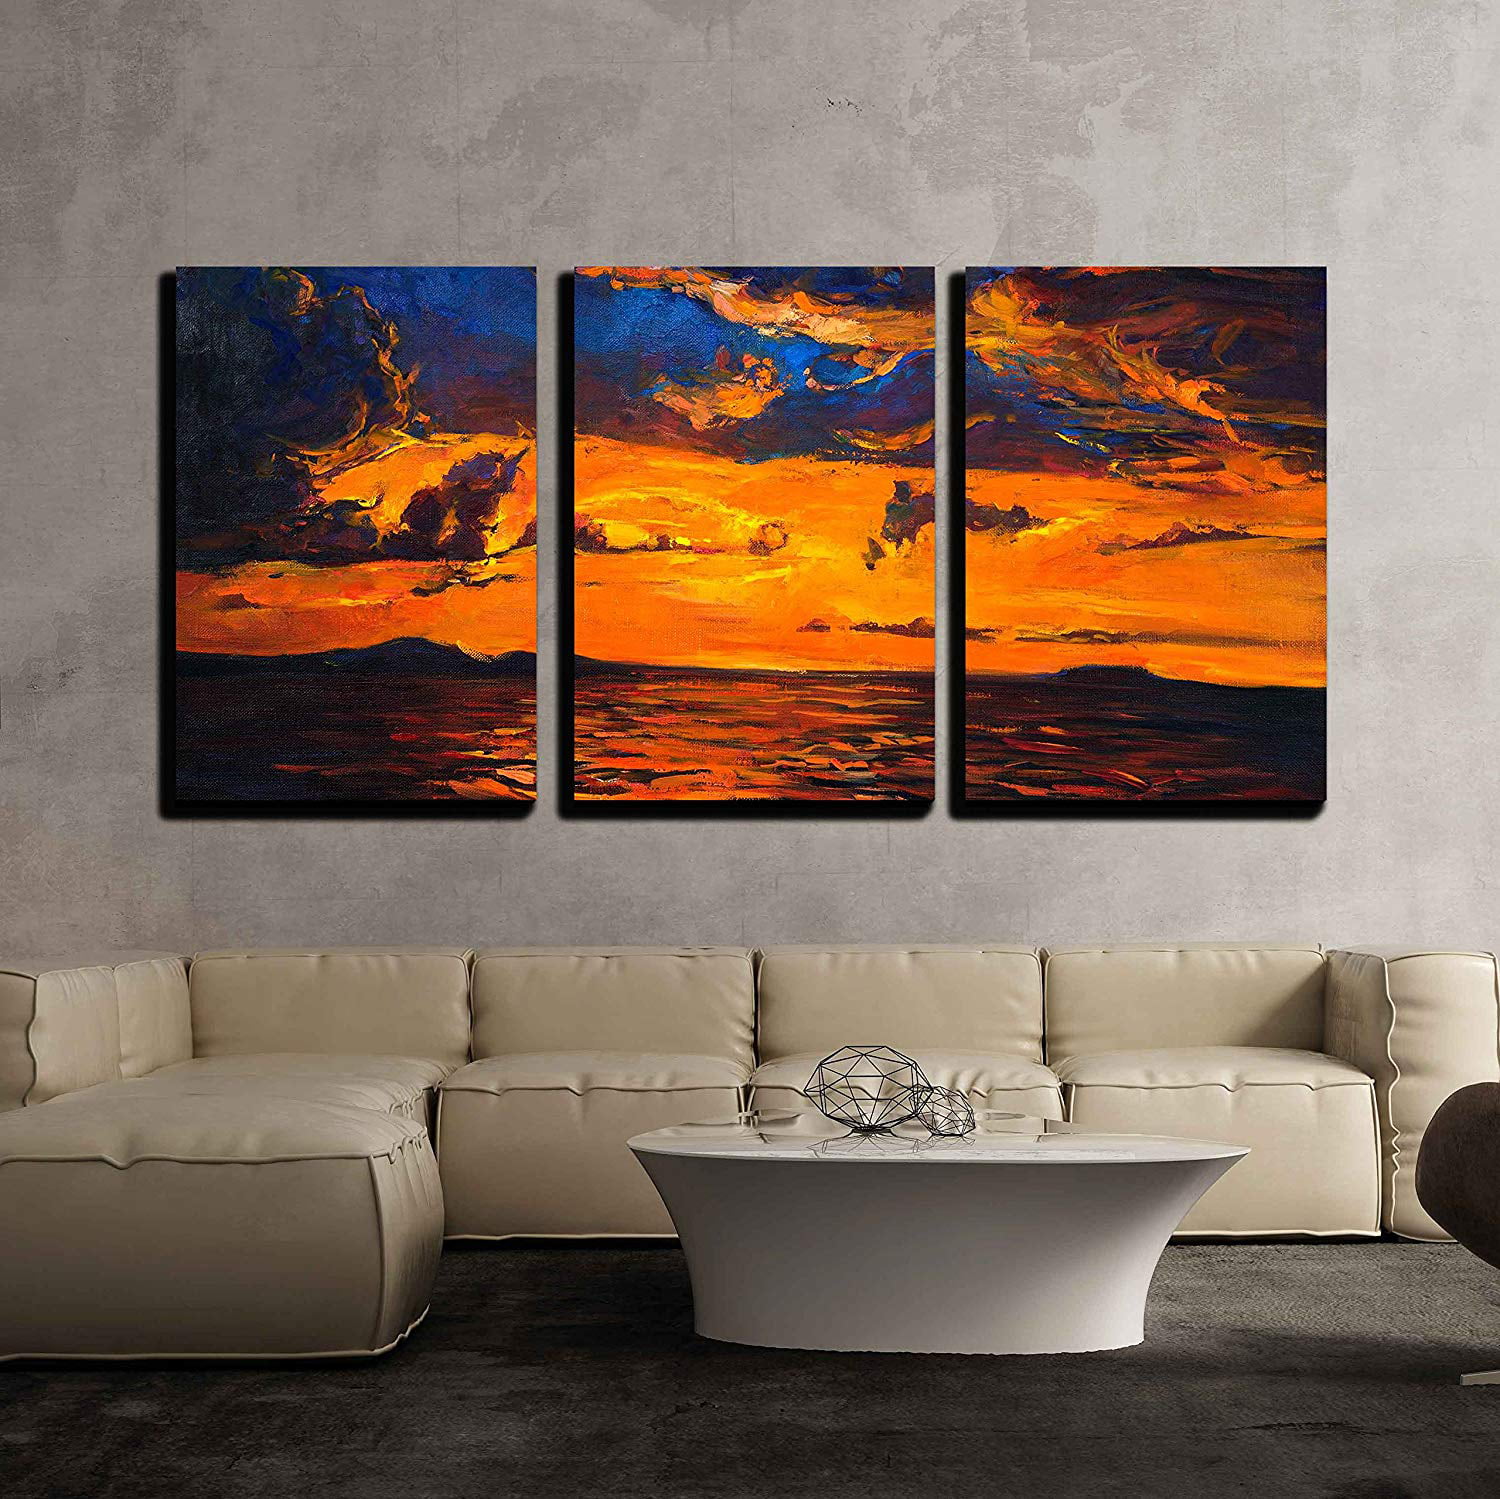 BEAUTIFUL COLOURFUL SUNSET MODERN WALL ART CANVAS PRINT PICTURE READY TO HANG 